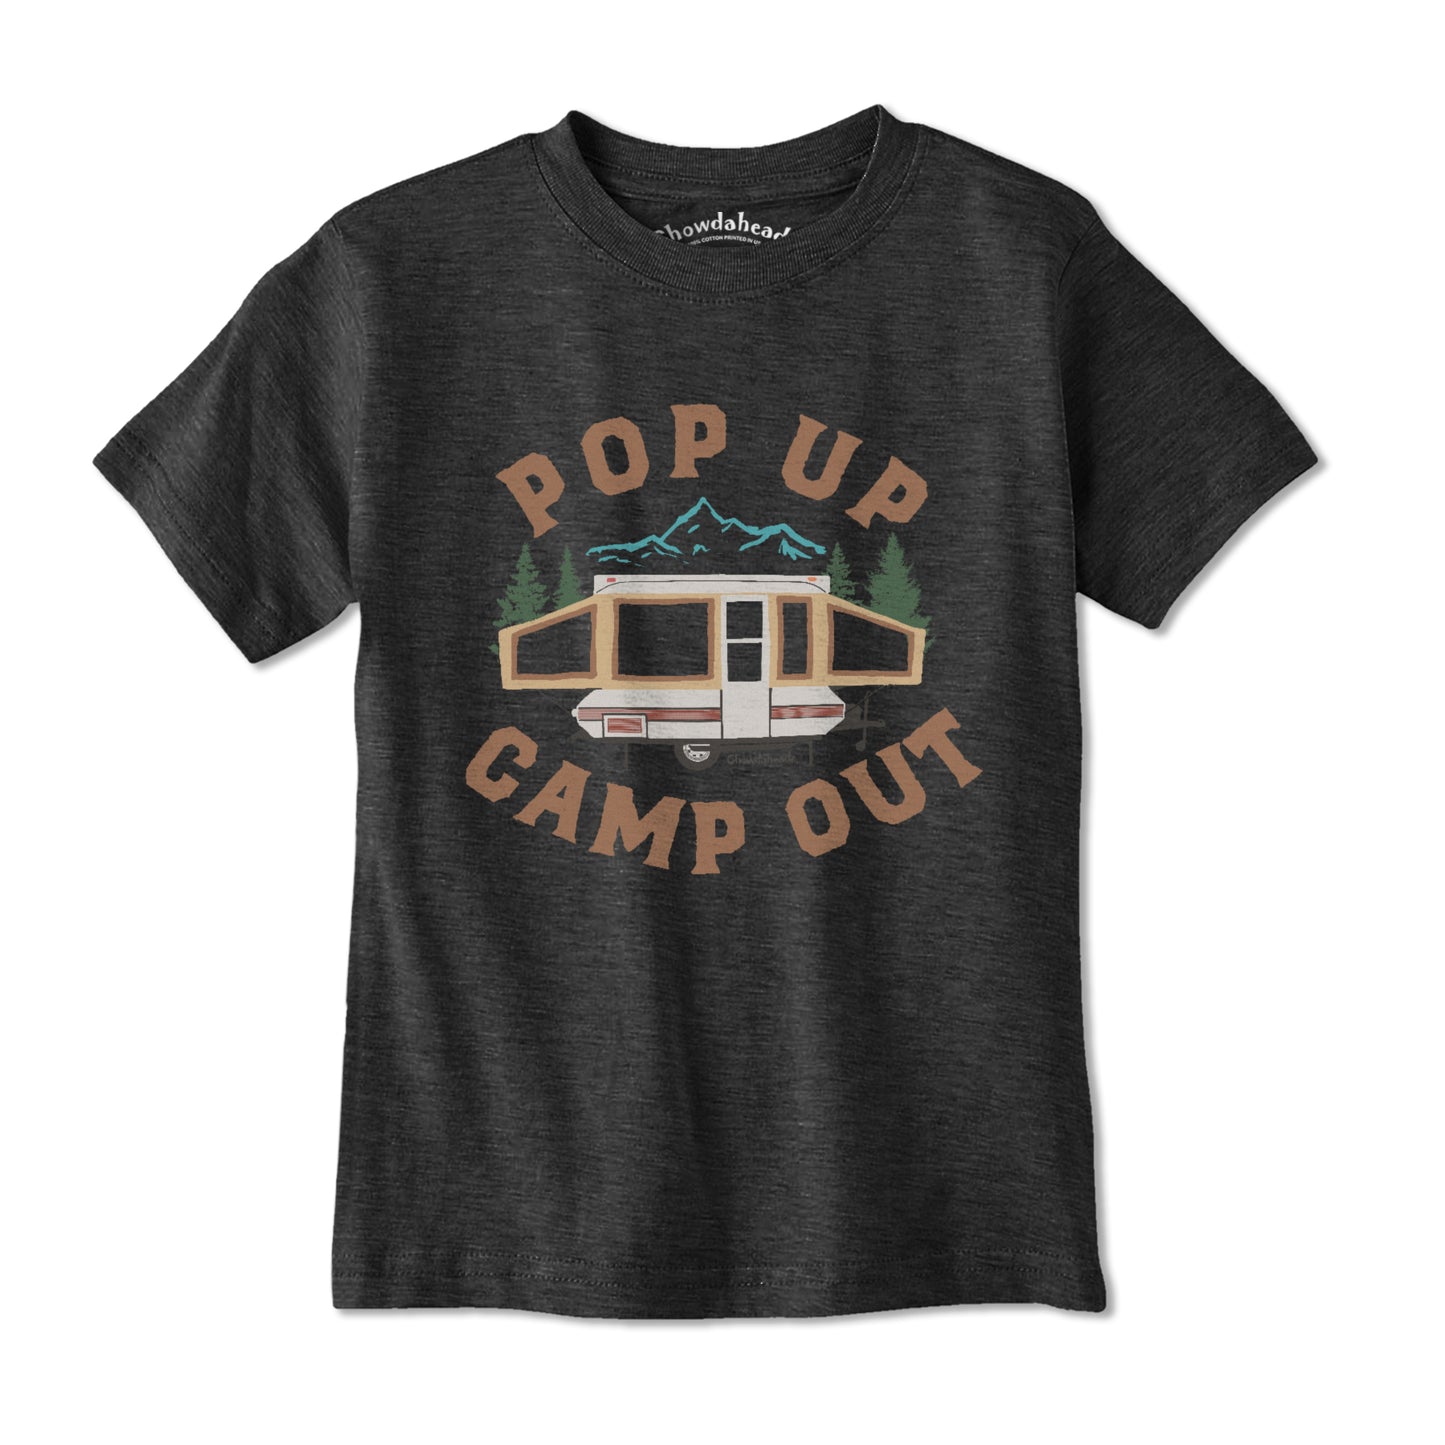 Pop Up Camp Out Youth T-Shirt - Chowdaheadz